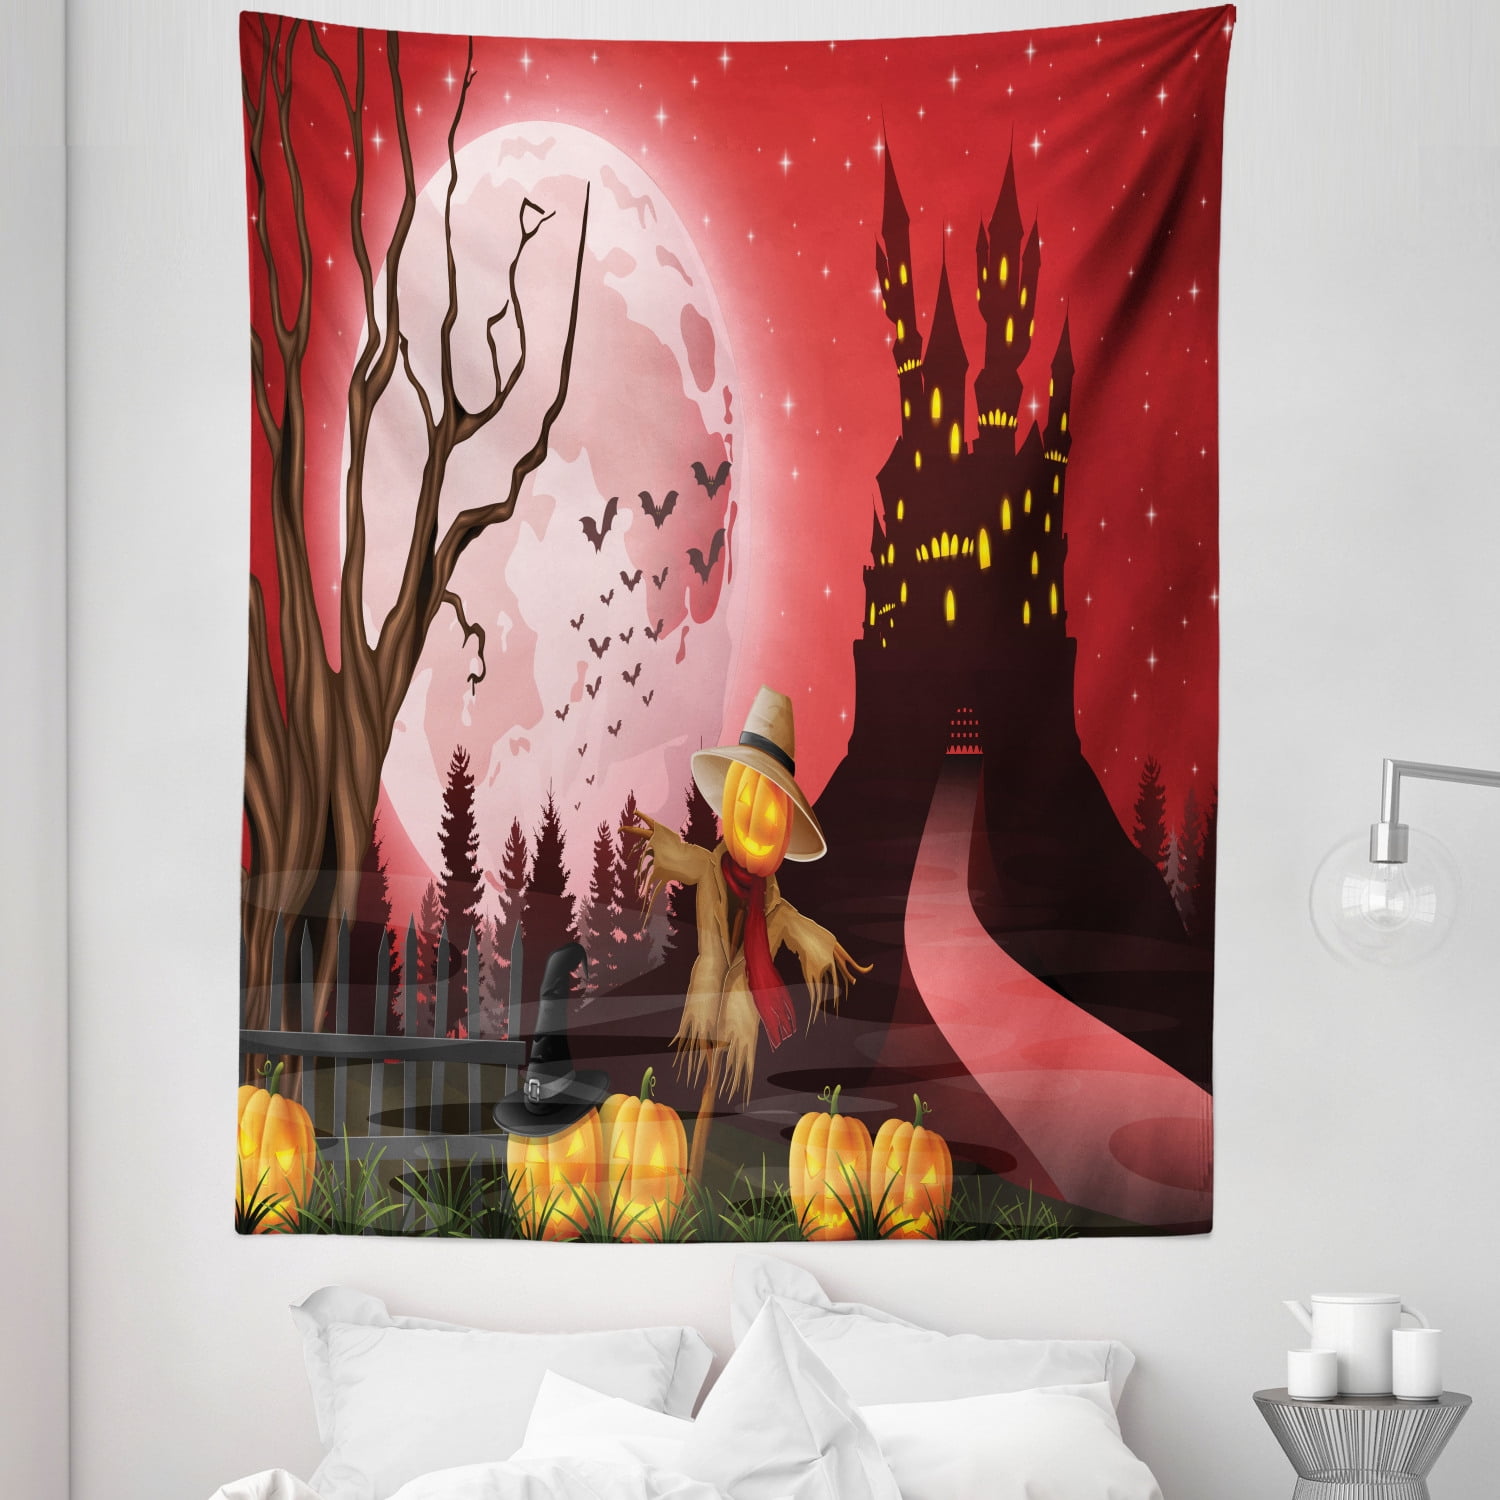 Scarecrow Tapestry, Halloween Themed Illustration with Haunted Chateau at  Scary Atmosphere Pumpkins, Fabric Wall Hanging Decor for Bedroom Living Room  Dorm, Sizes, Multicolor, by Ambesonne